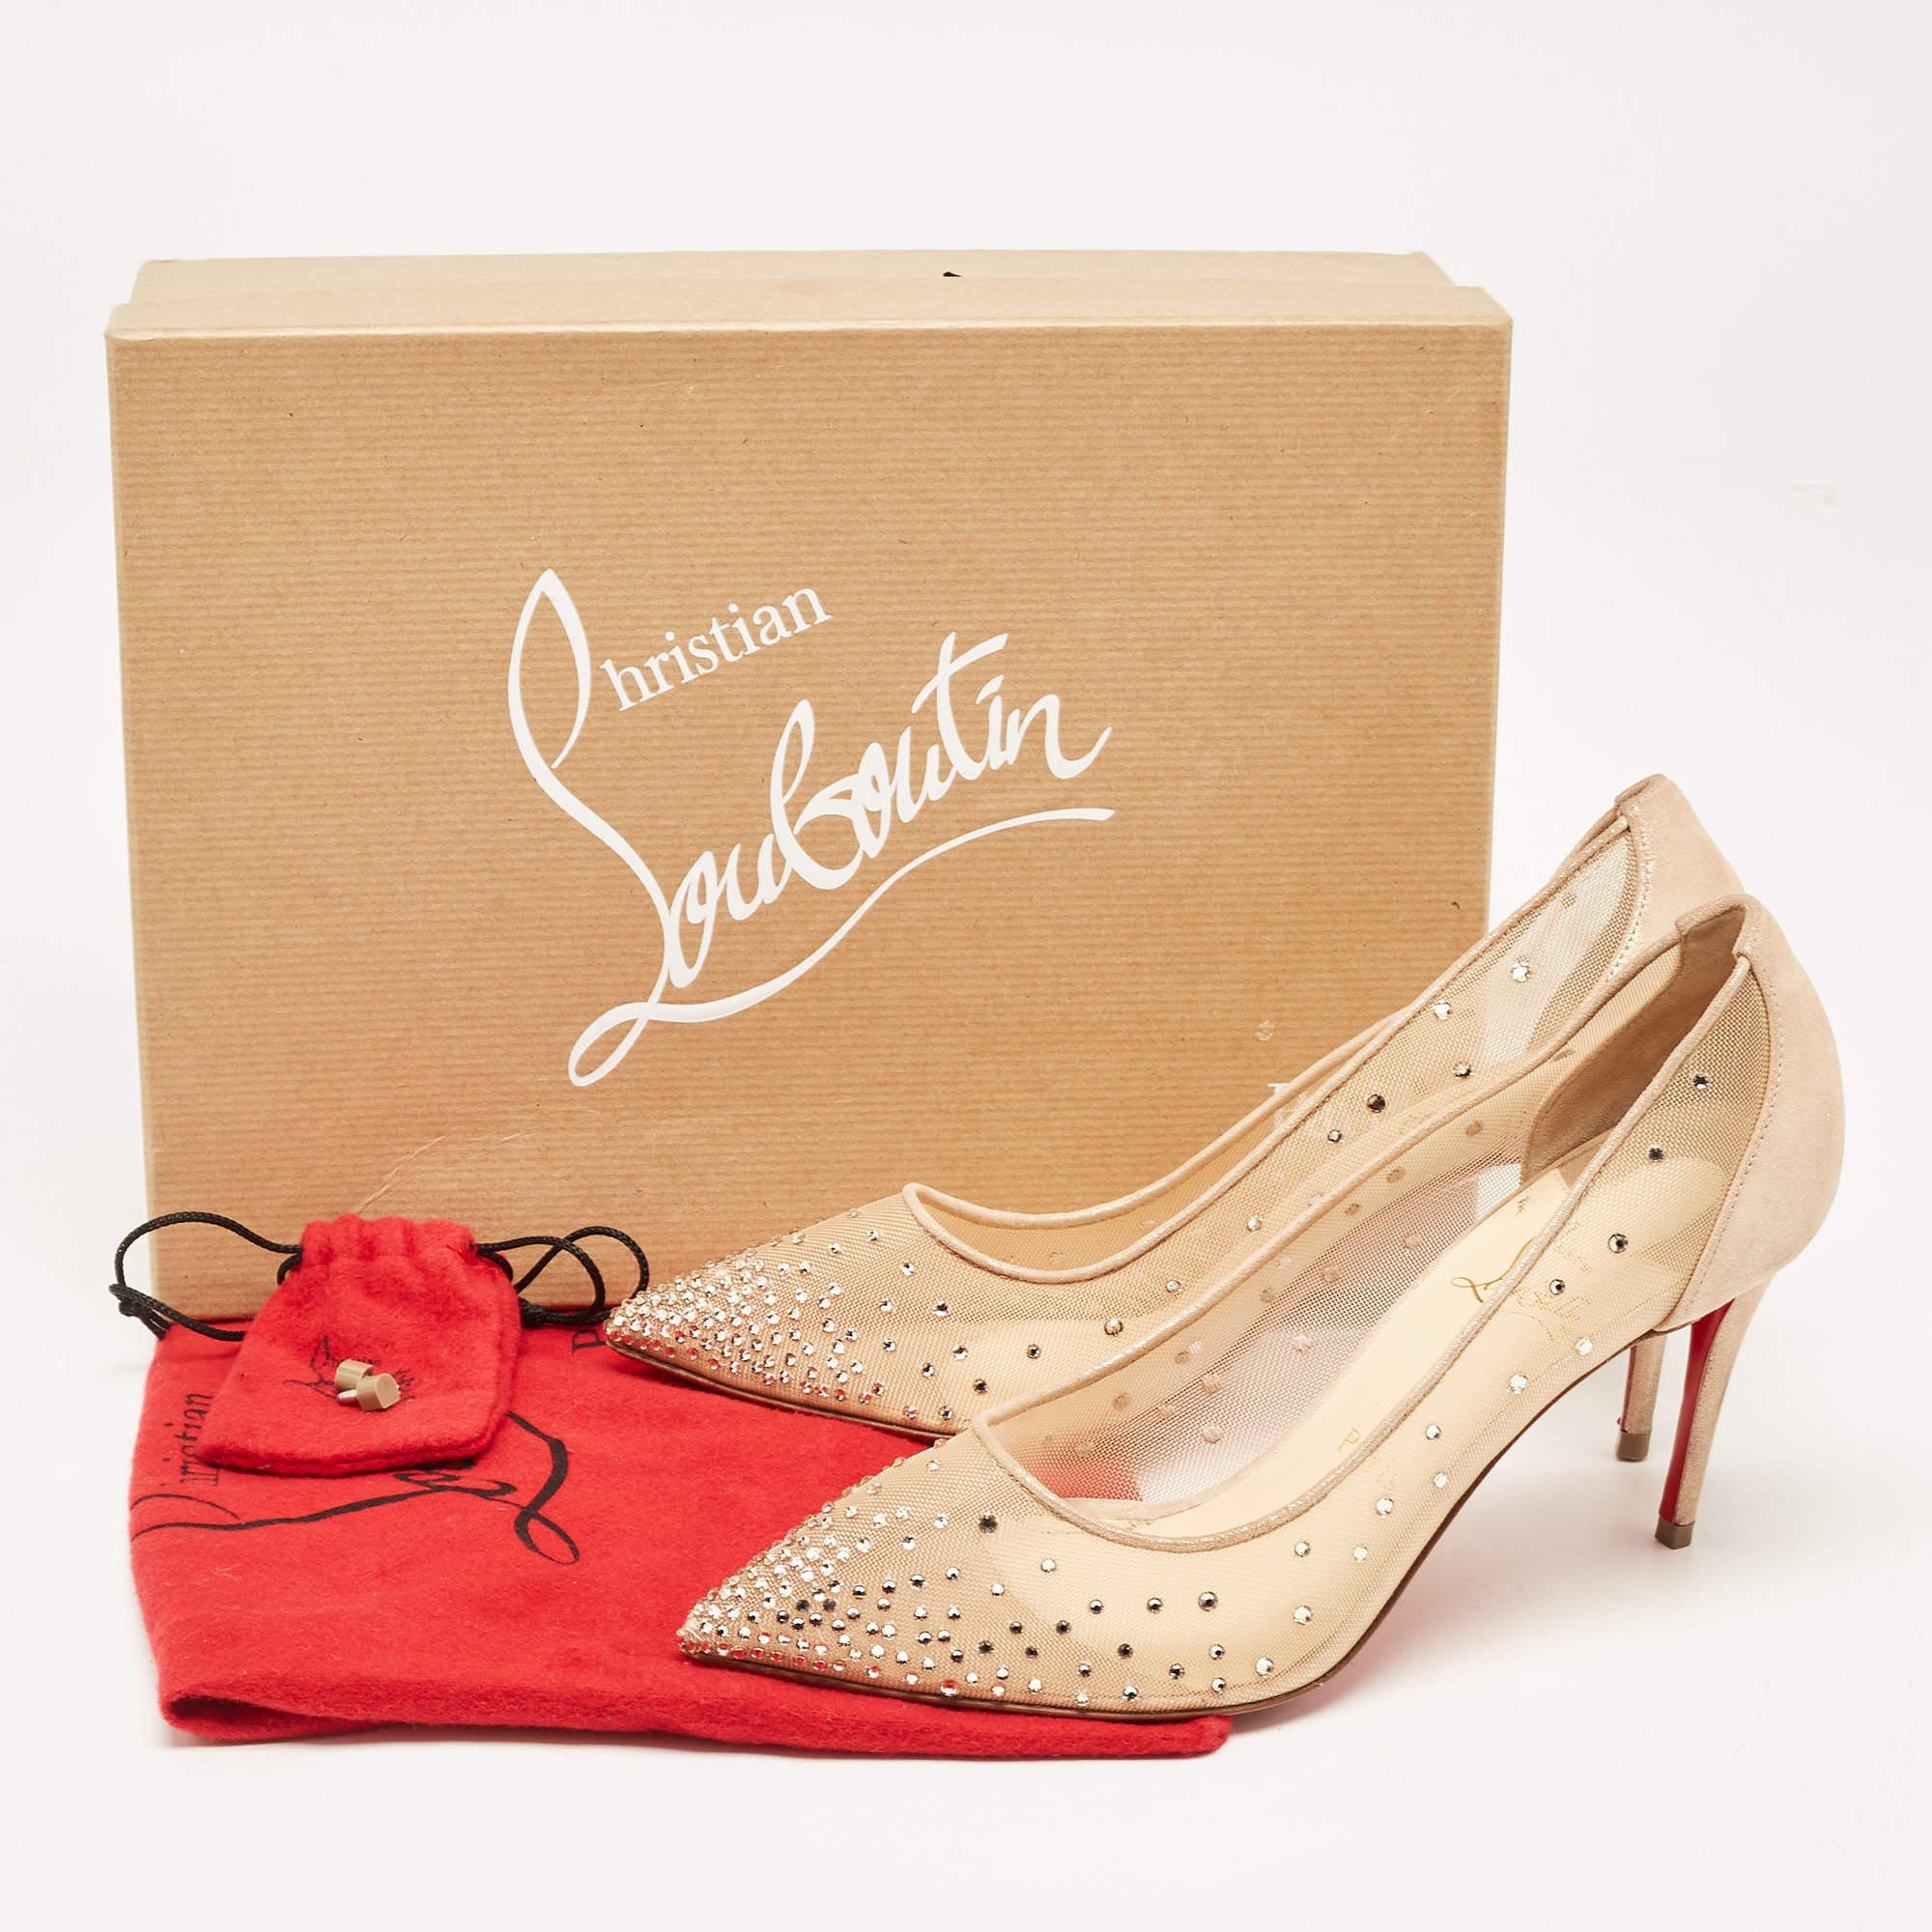 Christian Louboutin Beige Mesh and Laminated Suede Follies Strass Pumps Size 37. 7